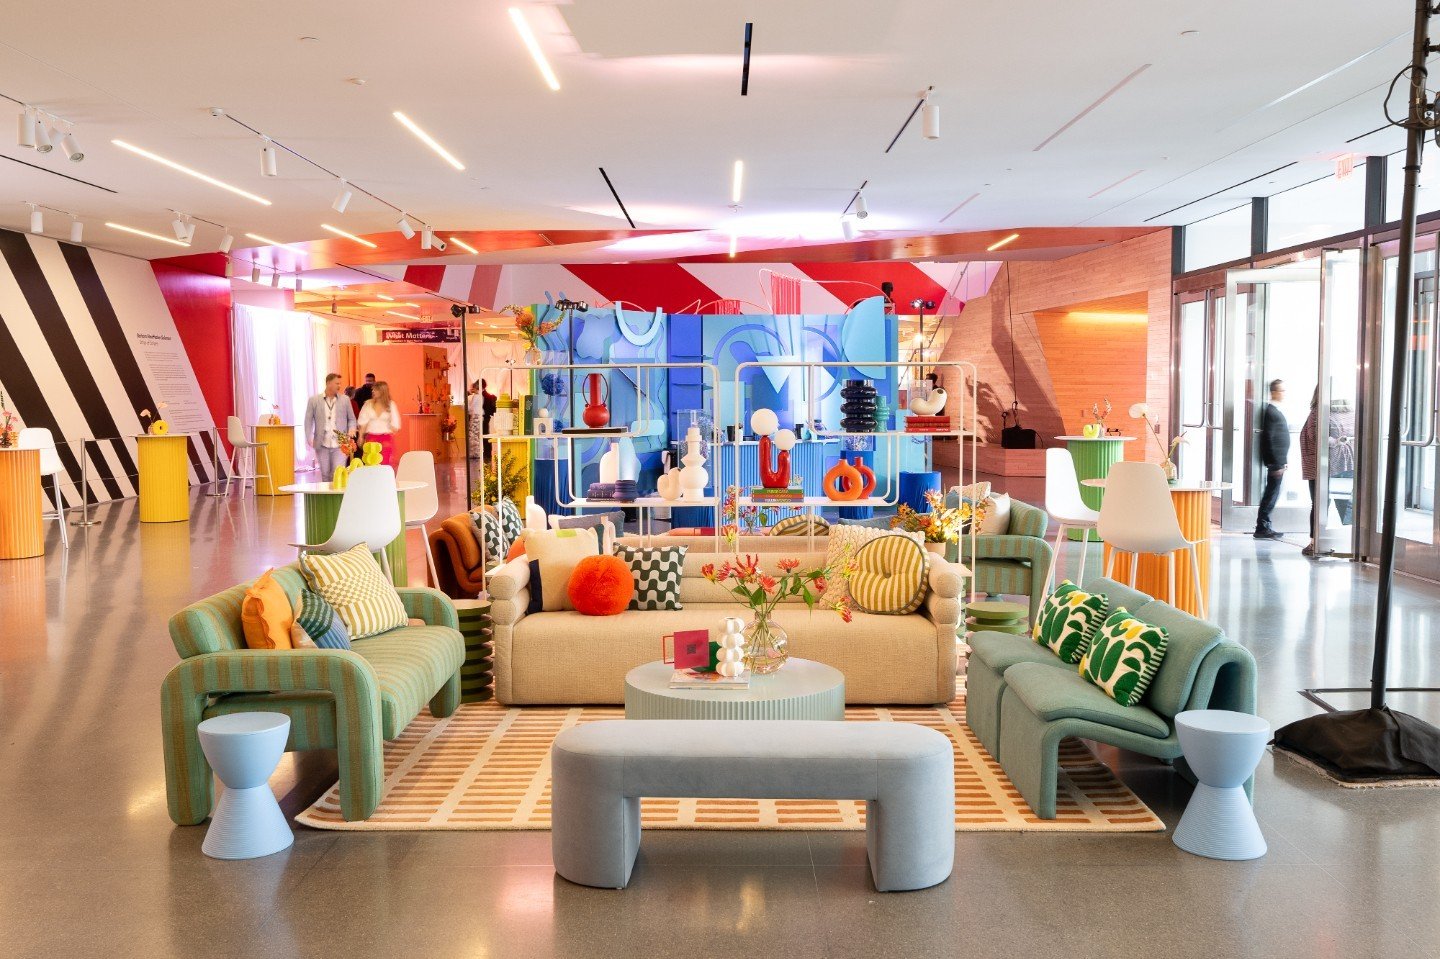 Bringing the wild side to #EntireProductions #ModernArtAttack with The Wild Ones (@the_wild_ones_rentals) 🎨 They decked out SF MOMA with amazing, colorful furniture that perfectly matched our modern art theme! 🛋️ 

With over ten years of combined e